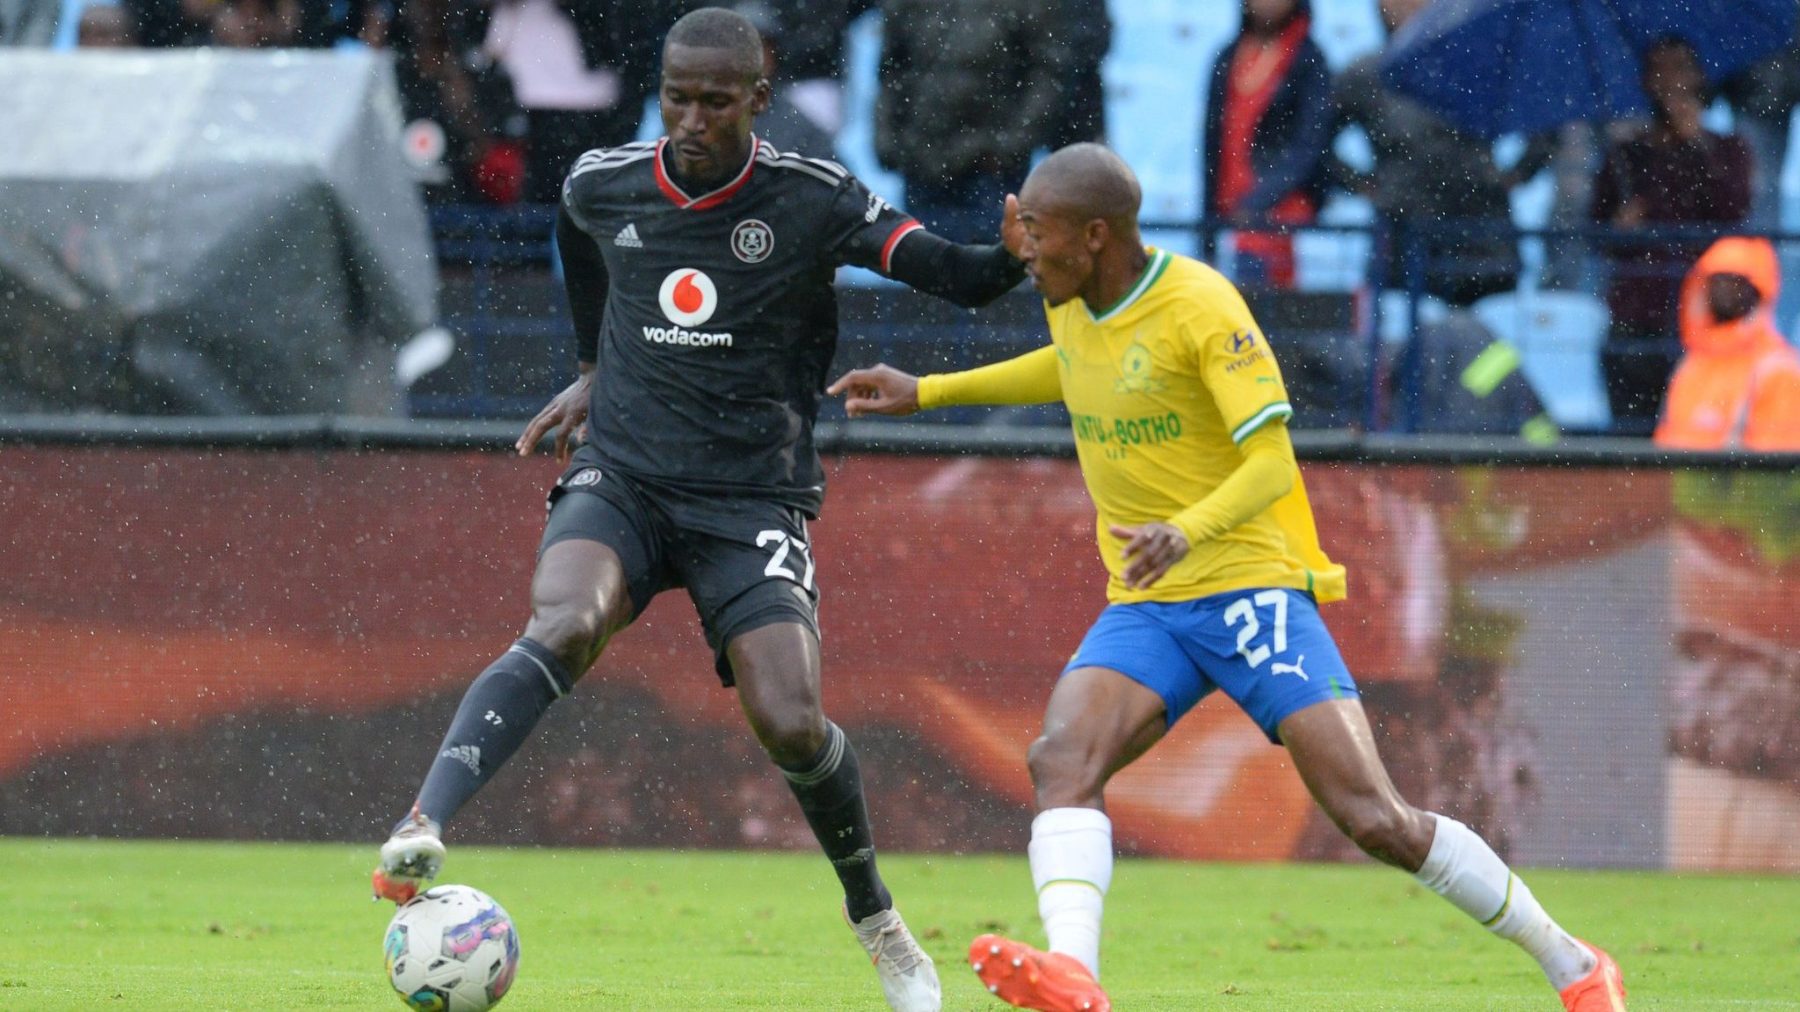 Sundowns continued where they left off